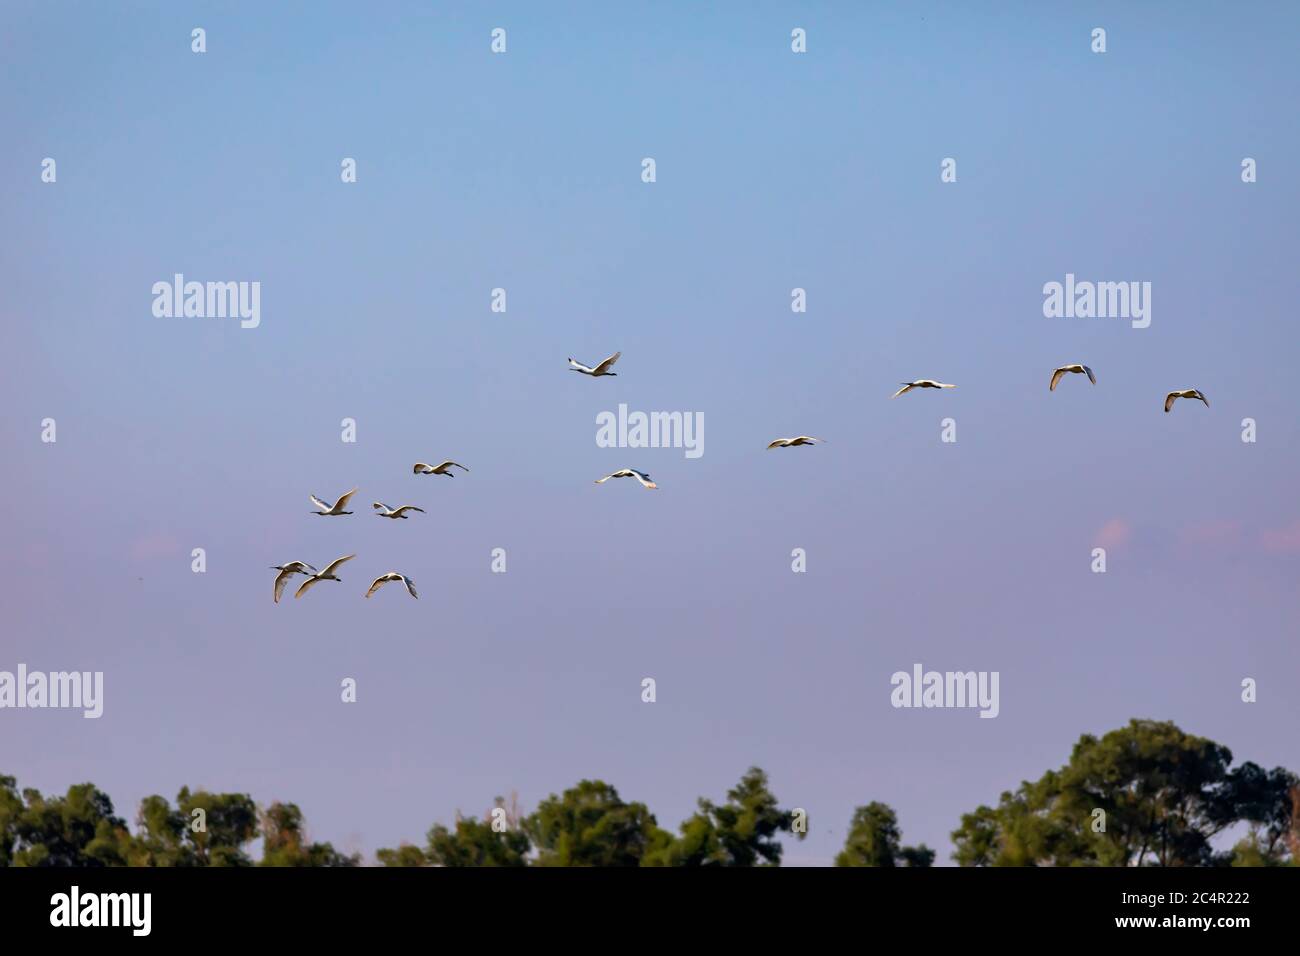 Flying birds. Birds silhouettes. Blue purple sky nature background. Abstract nature. Stock Photo